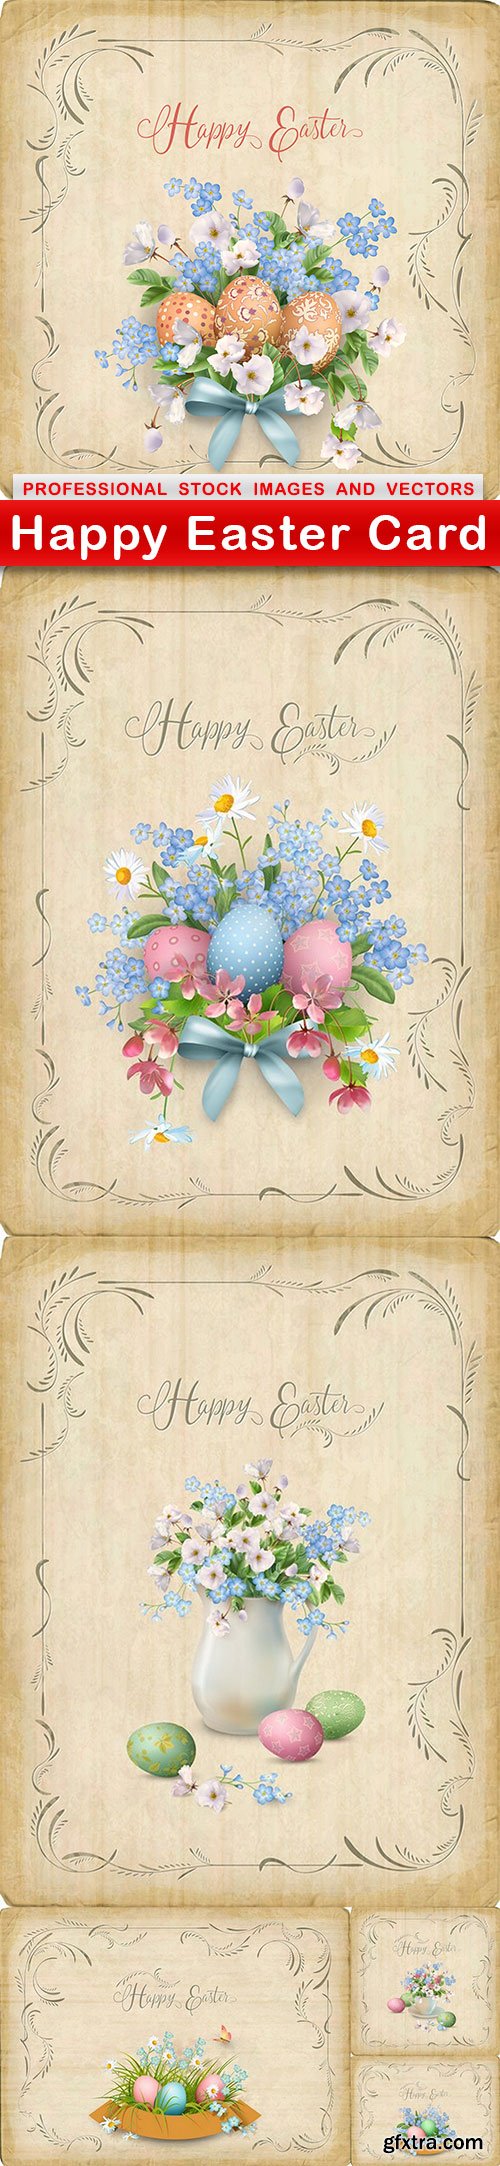 Happy Easter Card - 6 EPS